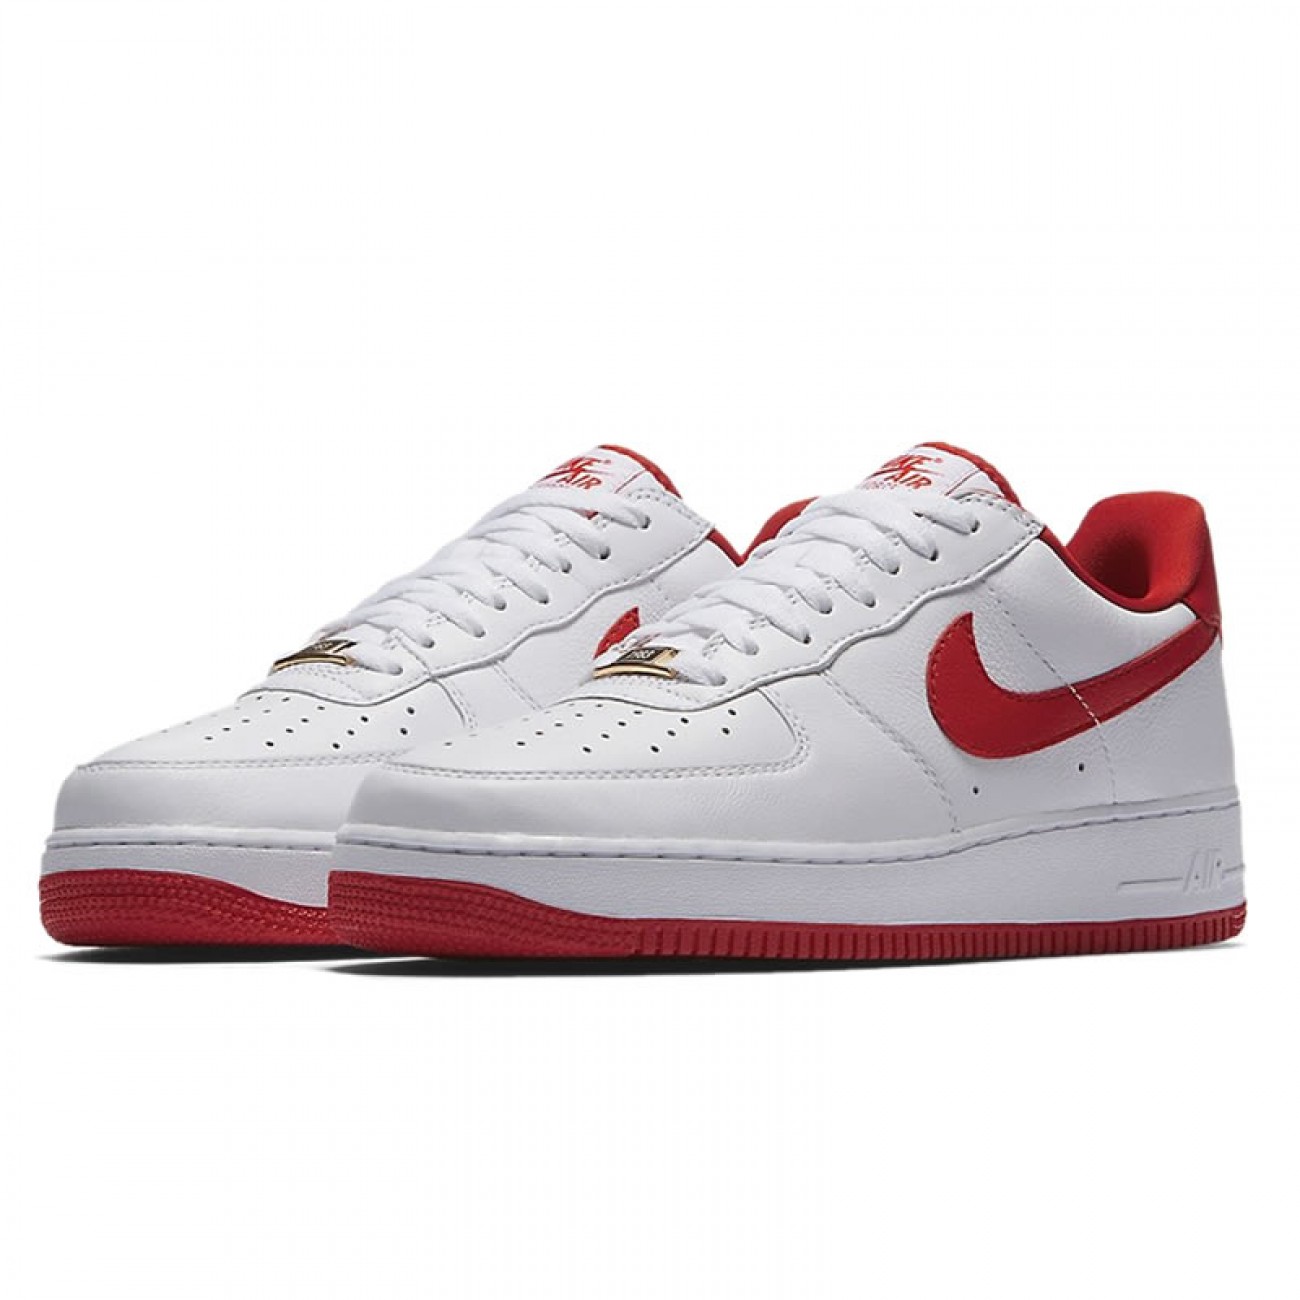 AIR FORCE 1 LOW RETRO CT 16 QS